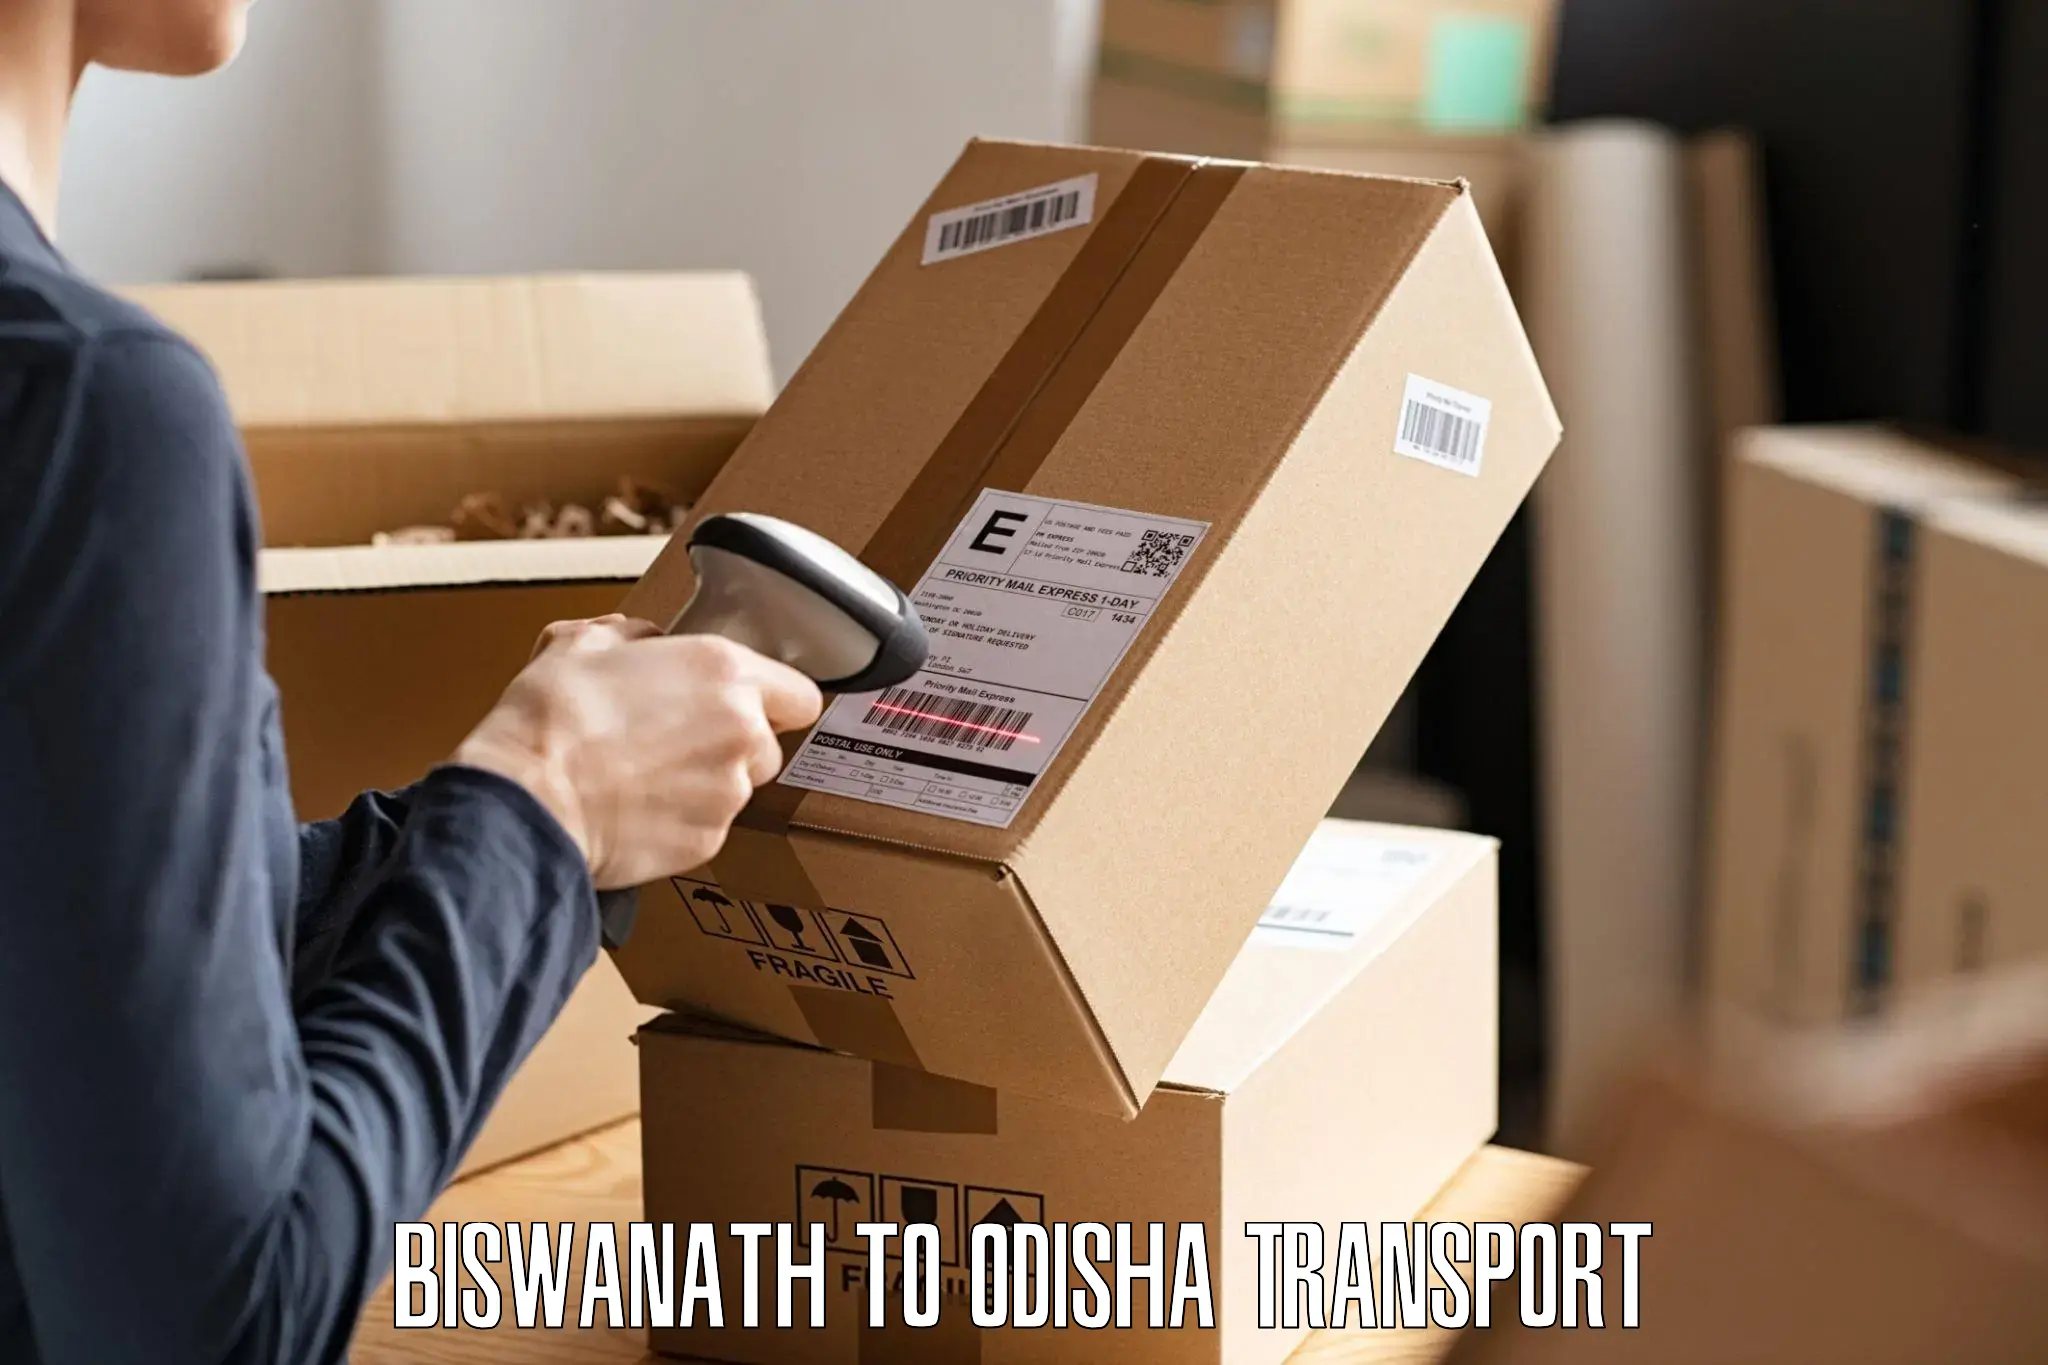 Commercial transport service Biswanath to Kupari